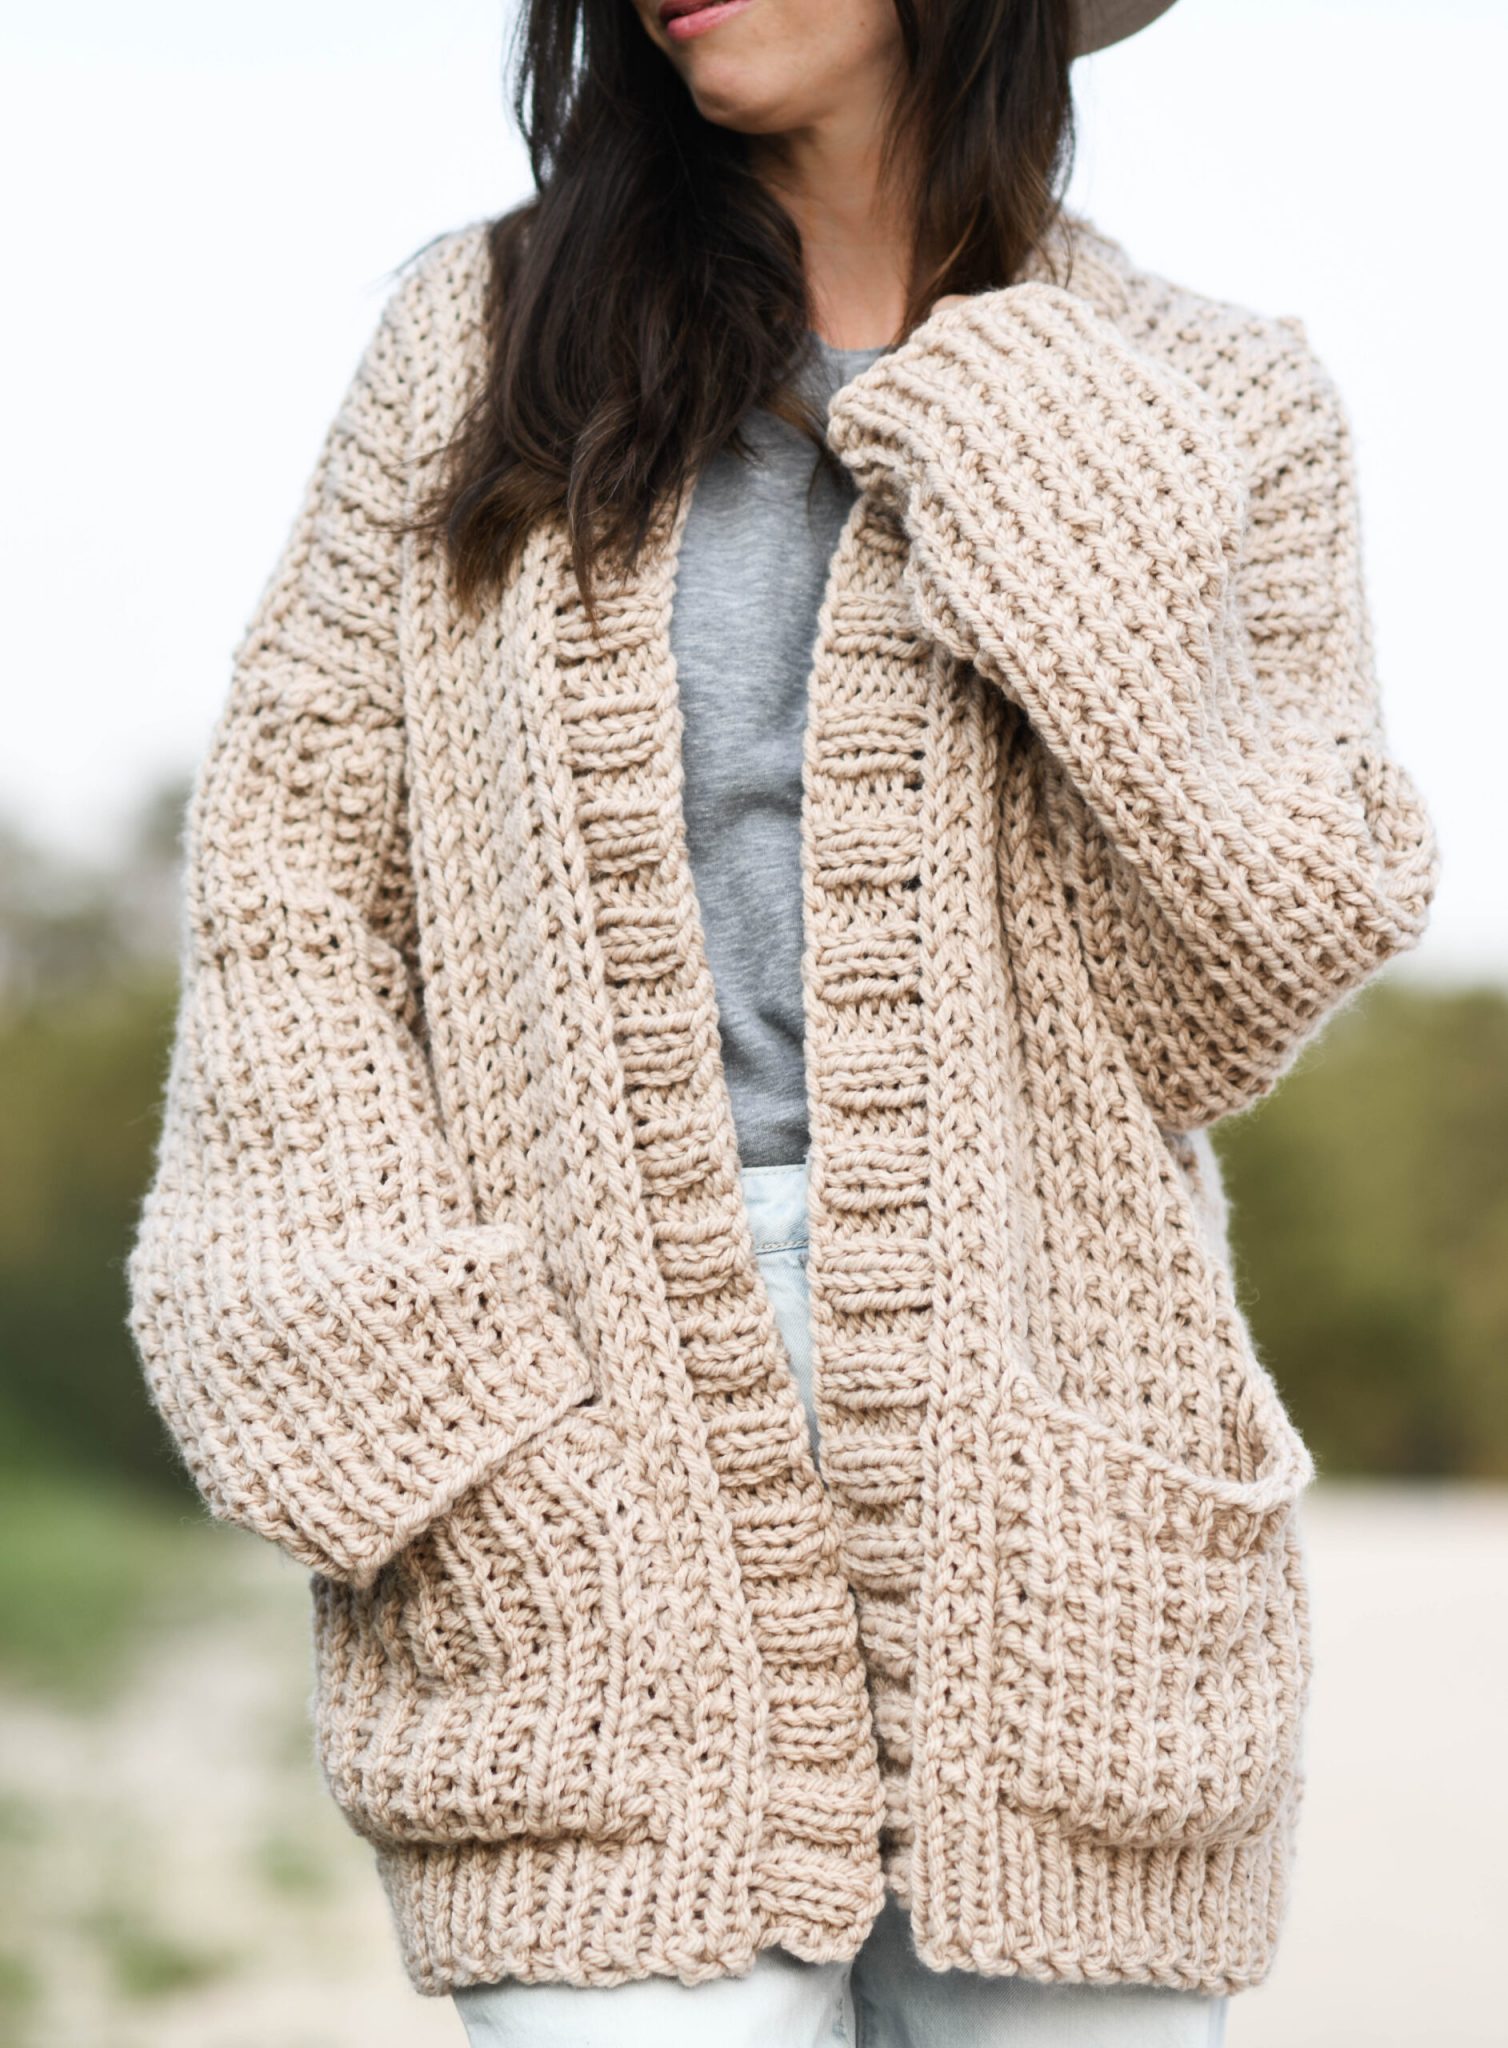 17 Free Chunky Knit Tutorials and Projects - Wonder Forest